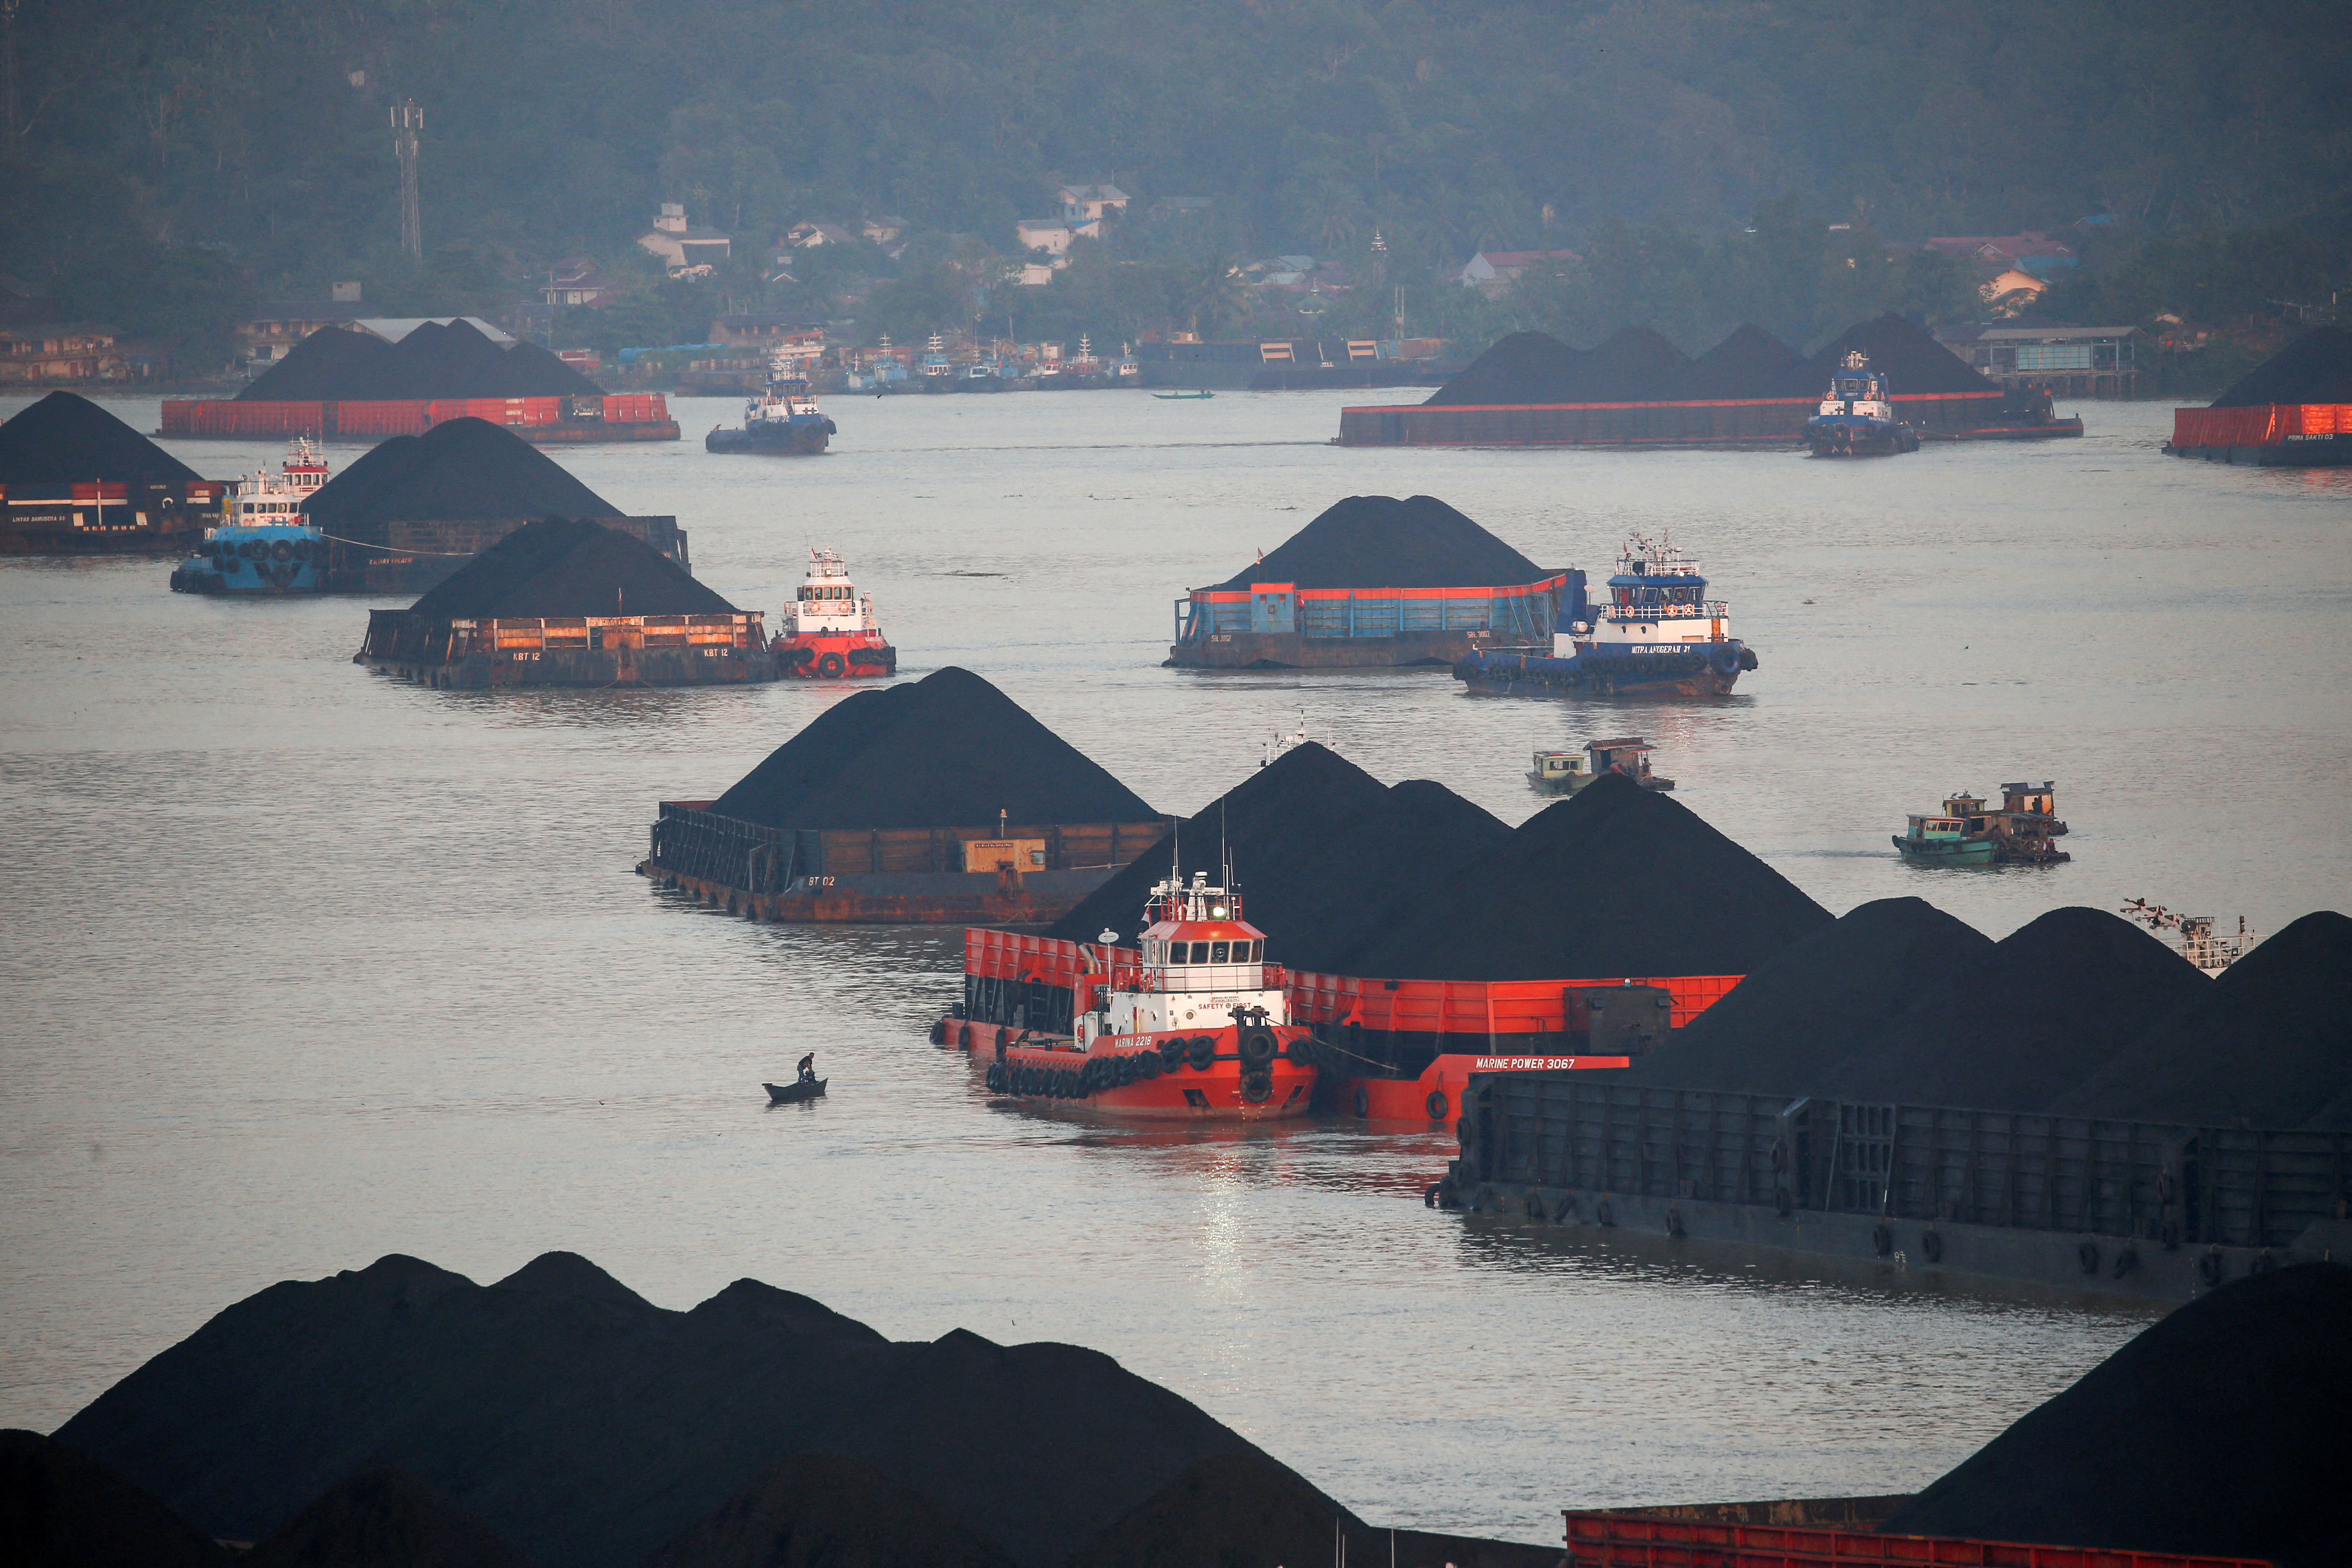 Coal barges are pictured as they queue to be pulled along Mahakam river in Samarinda, East Kalimantan province, Indonesia, August 31, 2019. Picture taken August 31, 2019. REUTERS/Willy Kurniawan